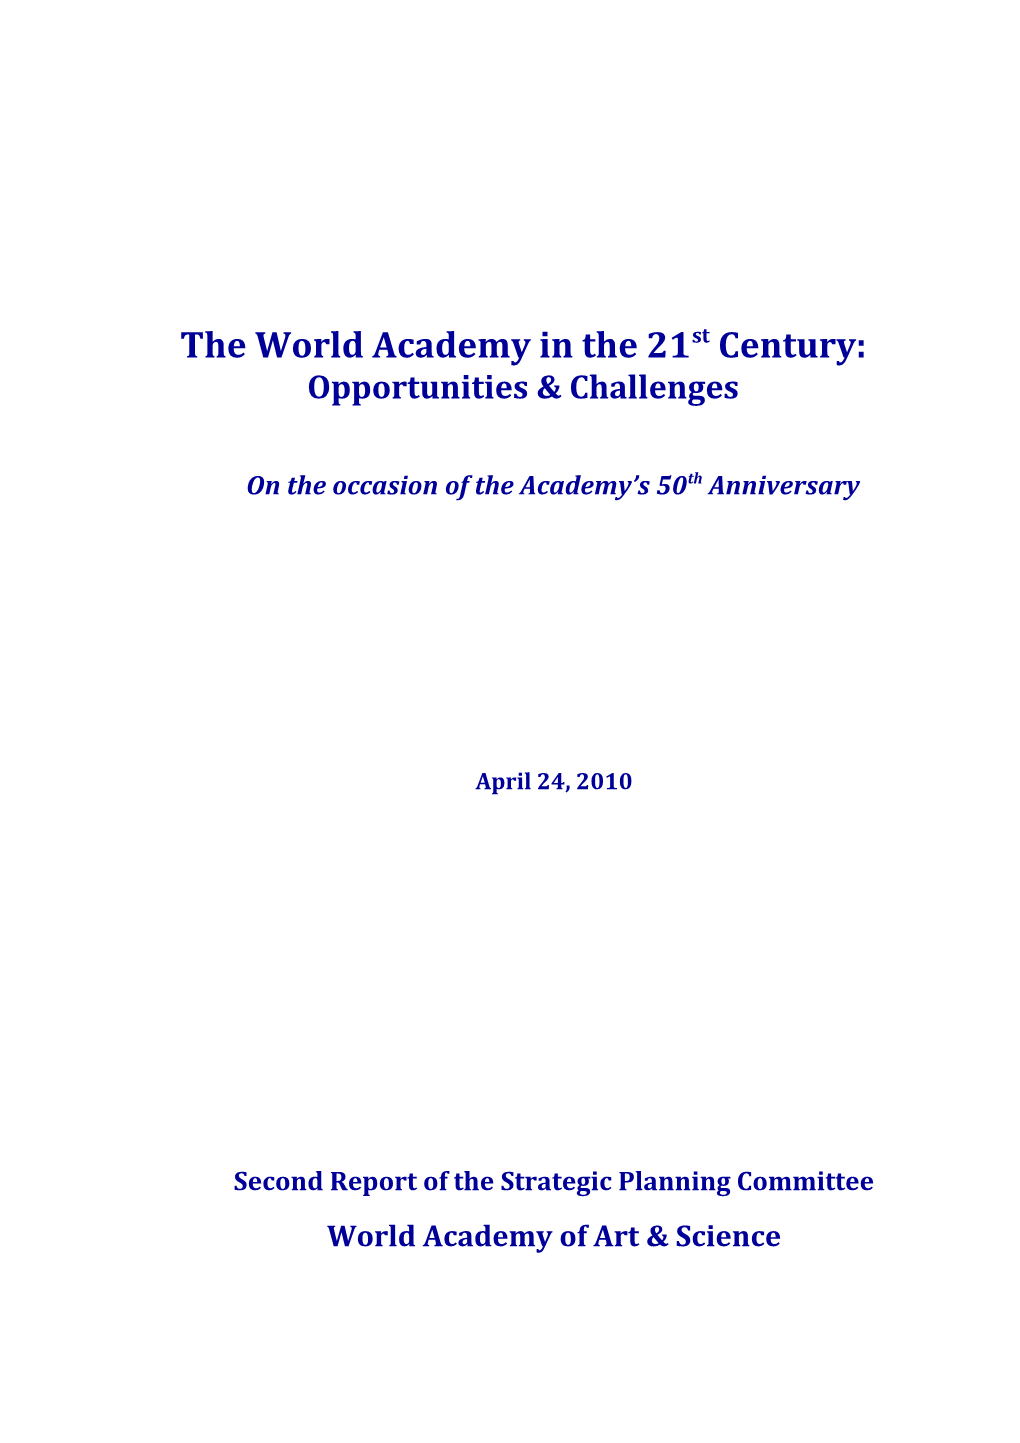 The World Academy in the 21St Century: Opportunities & Challenges